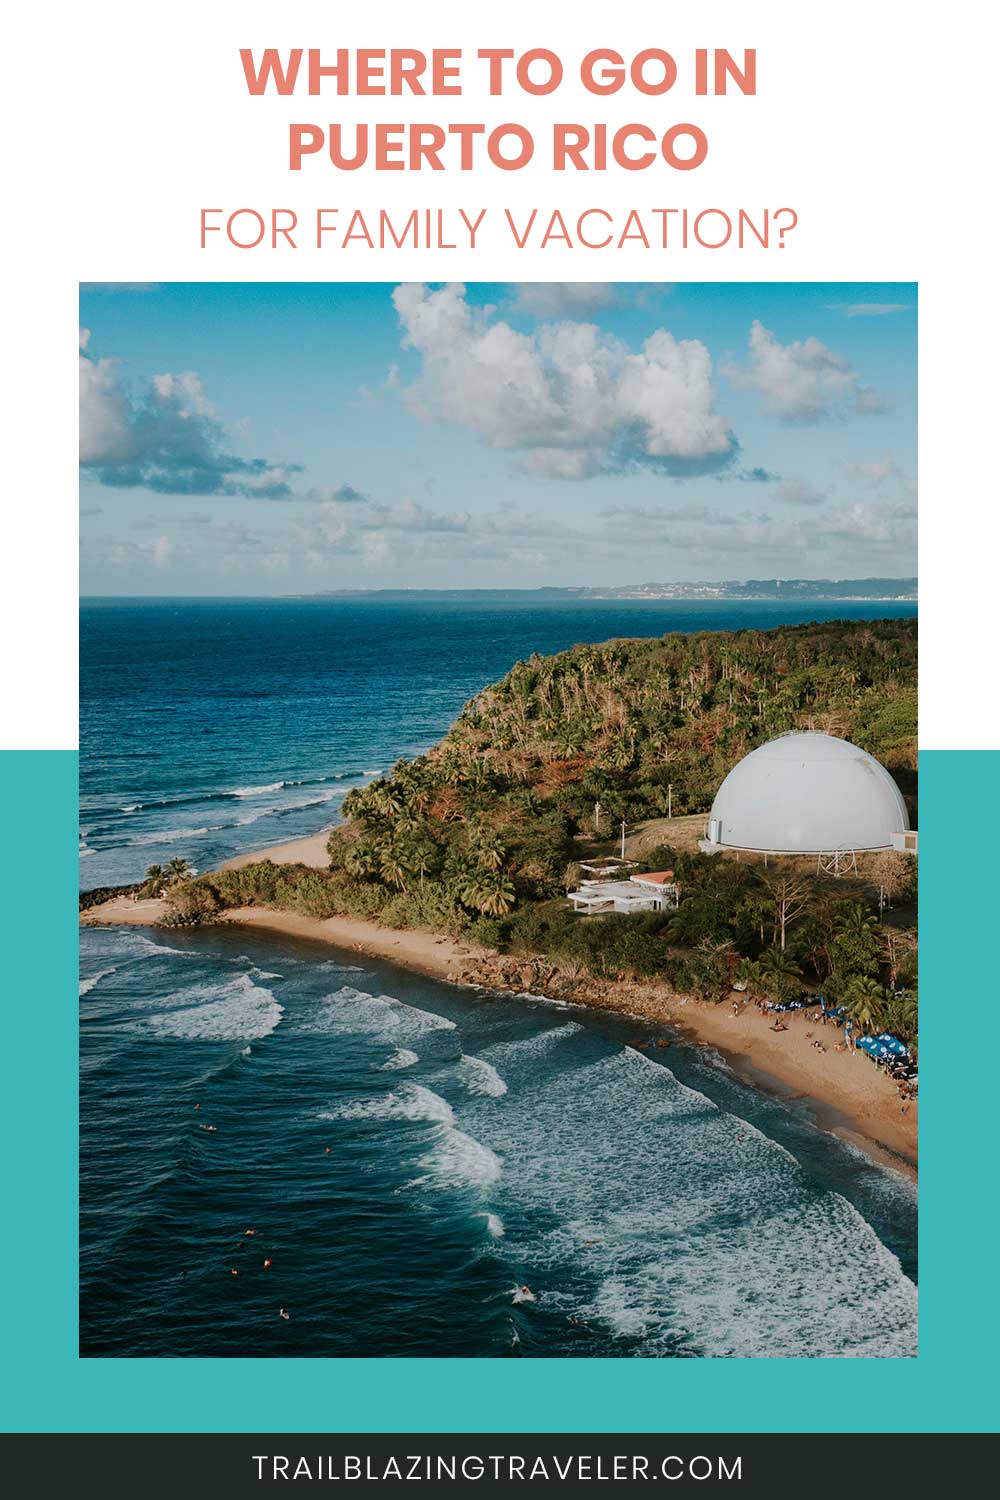 Big grey dome on a beach - Where to go in Puerto Rico for Family Vacation?